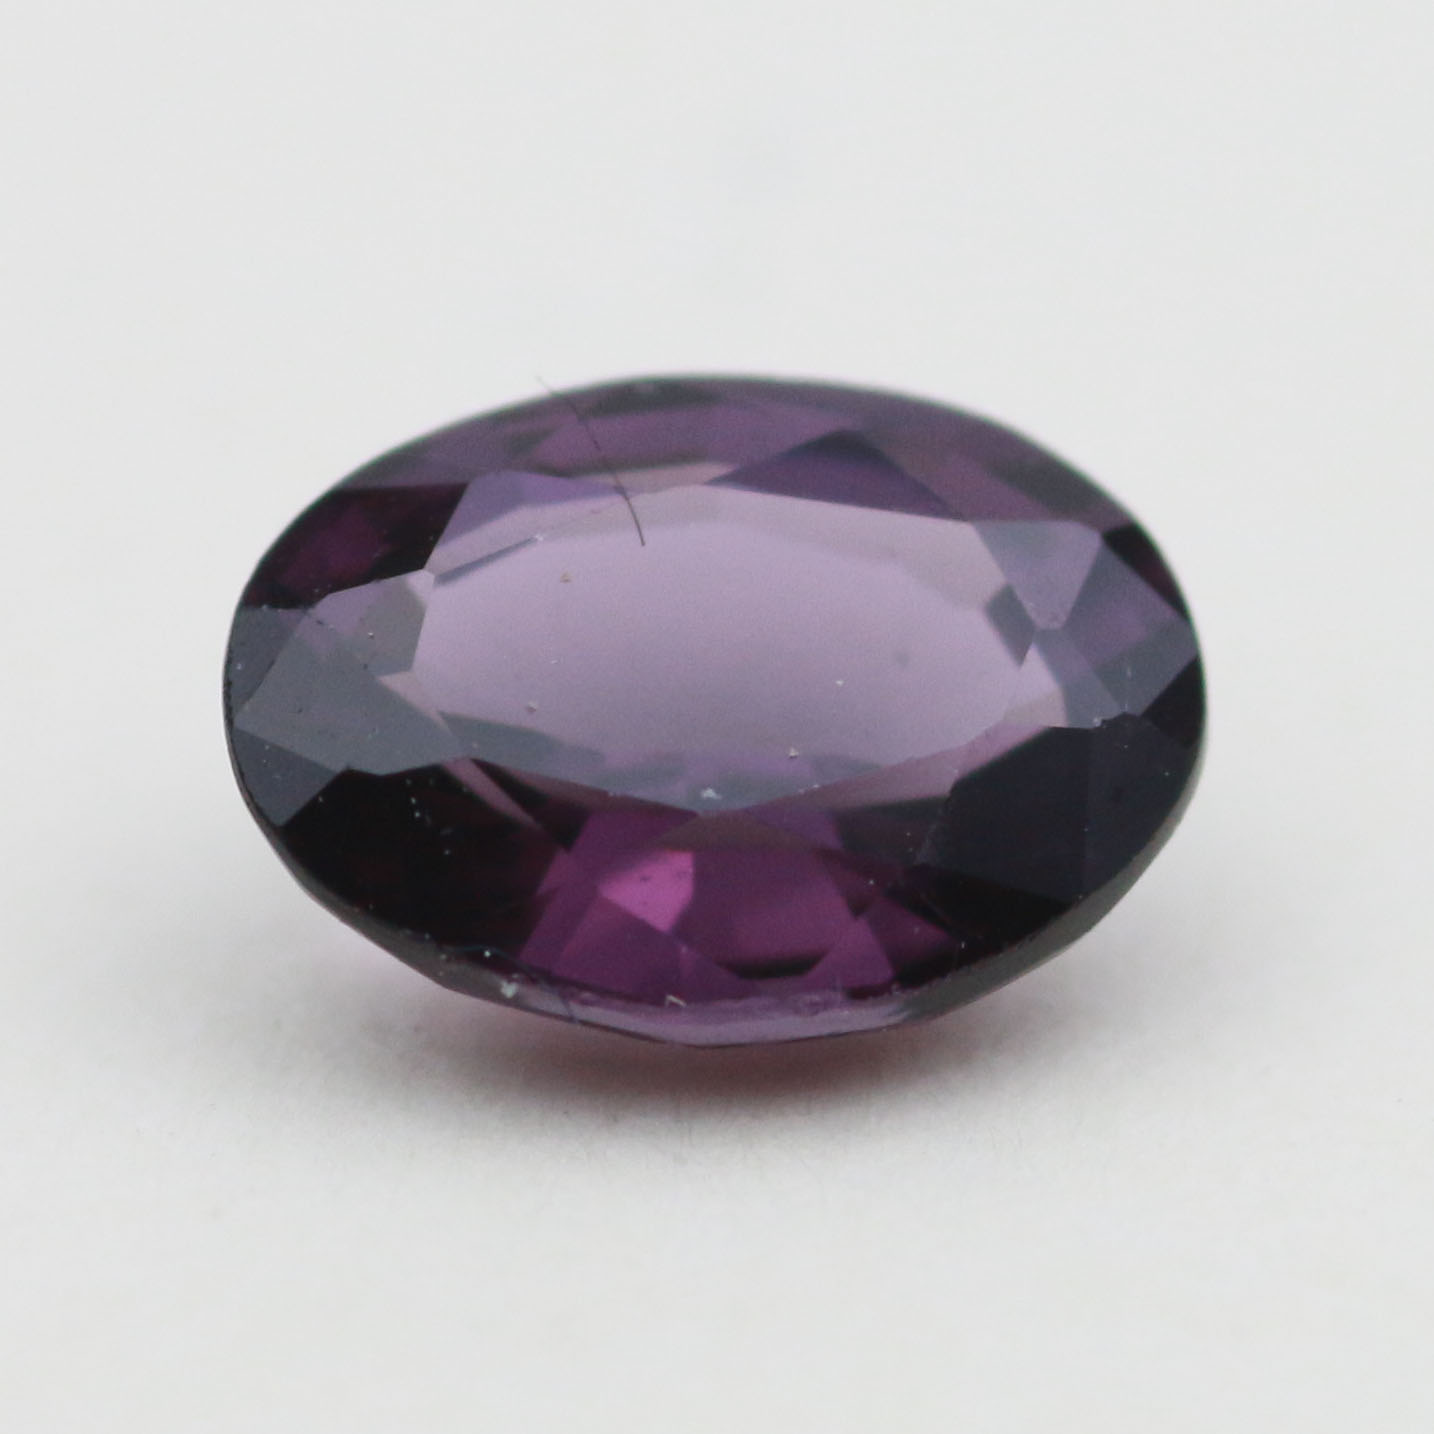 6.8X5.2 PURPLE SPINEL OVAL 0.9CT